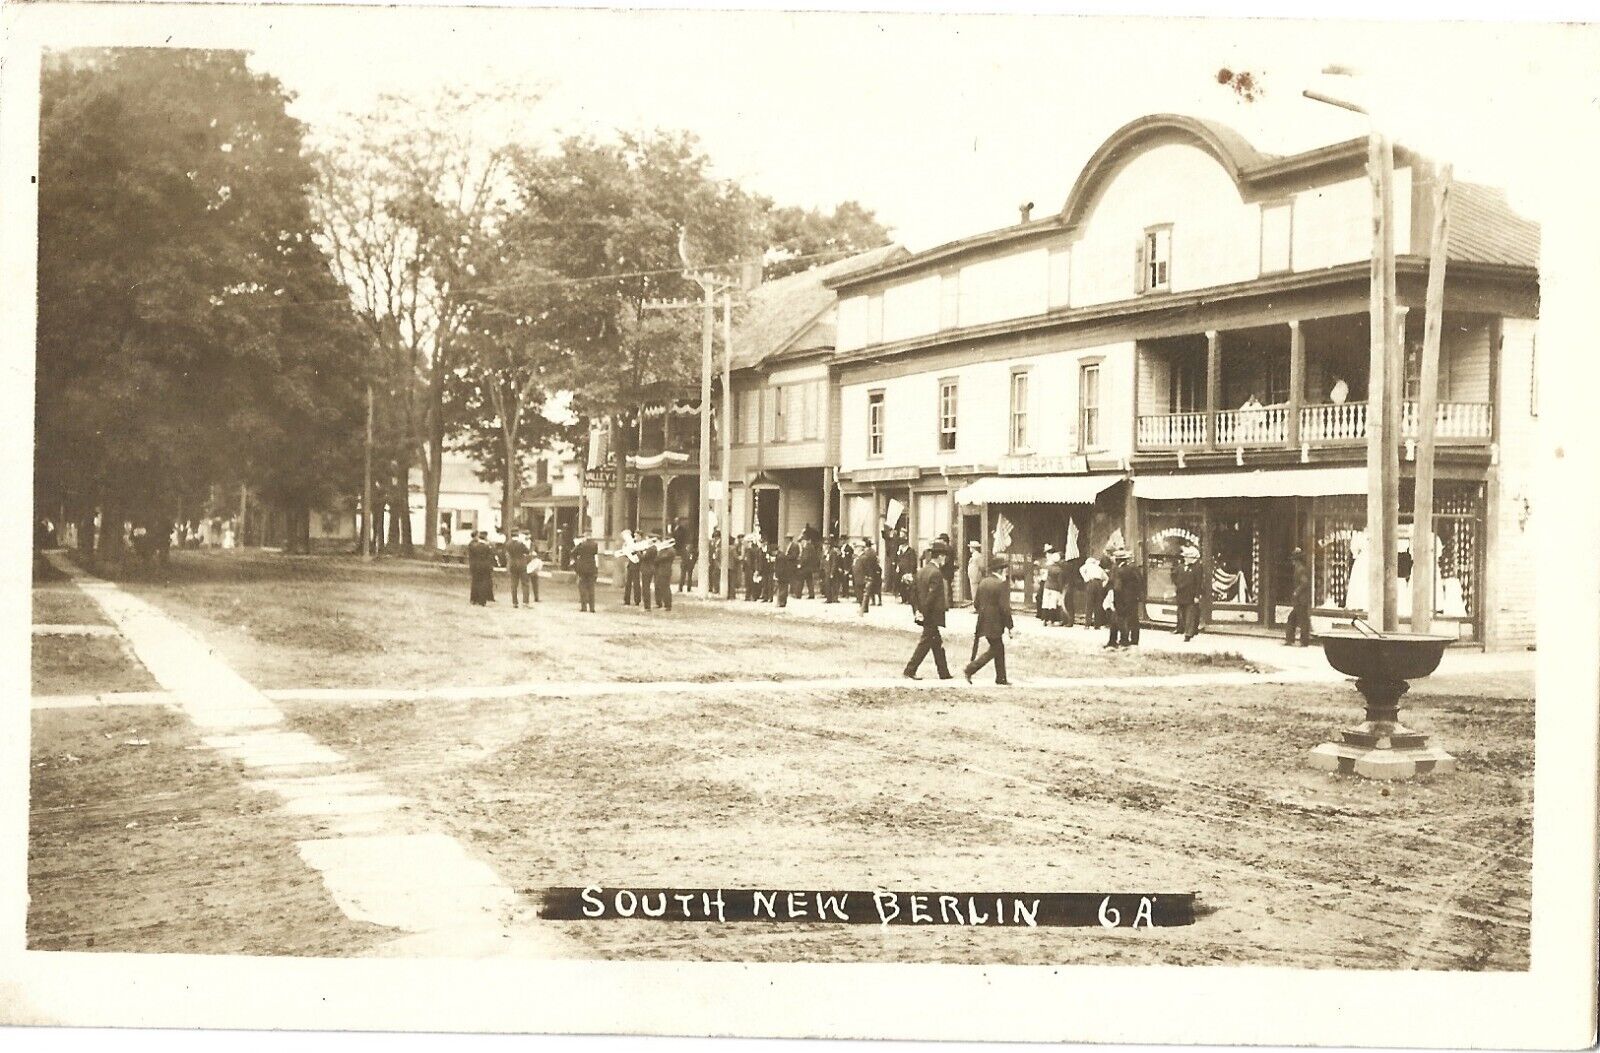 South New Berlin NY -- stores, street band, residents; nice 1913 RPPC